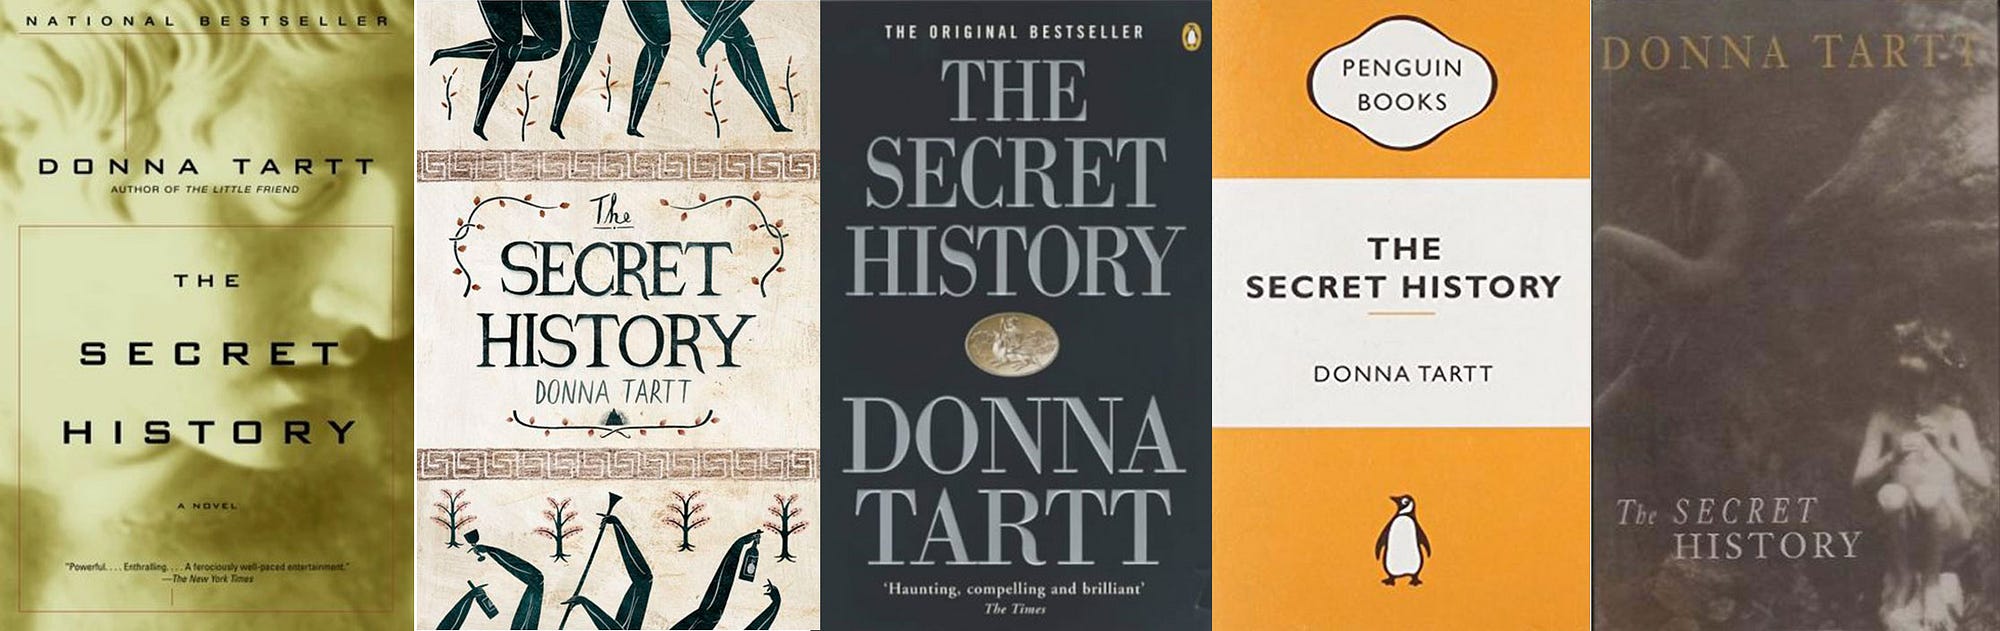 Redesigning The Secret History by Donna Tartt